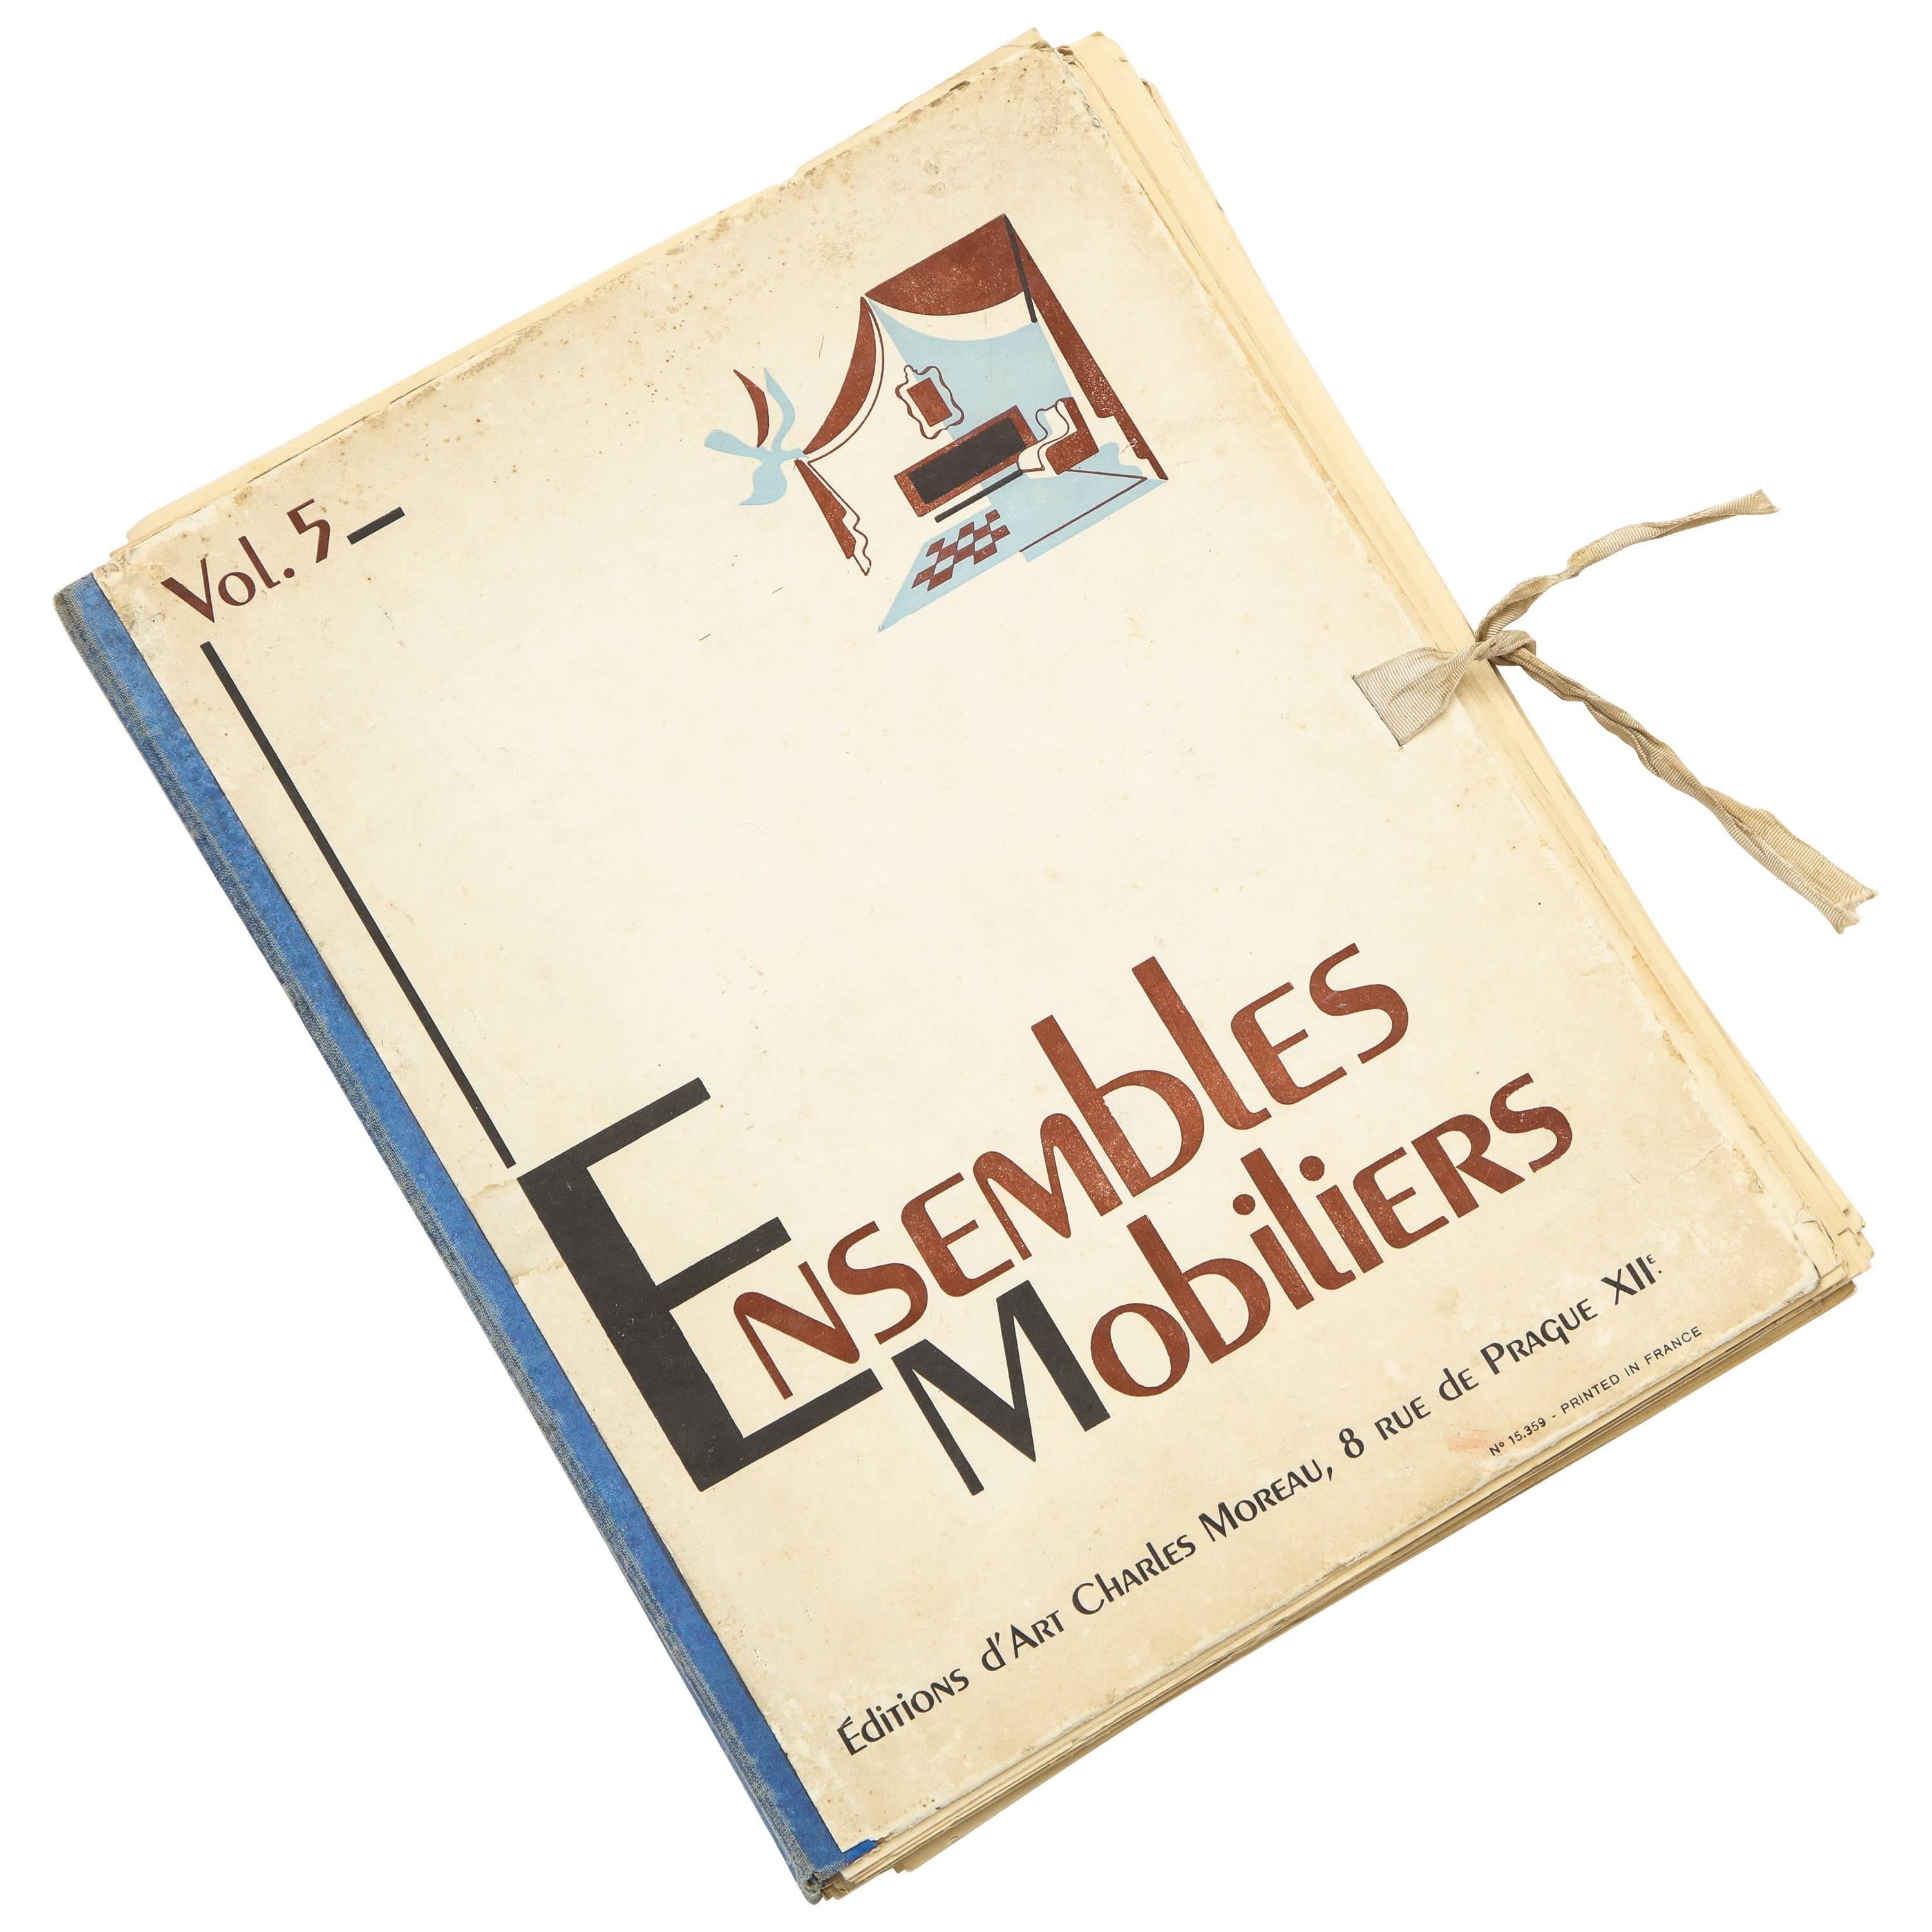 Ensembles Mobiliers, Charles Moreau Editor Deco Book, 1930s-1940s, France